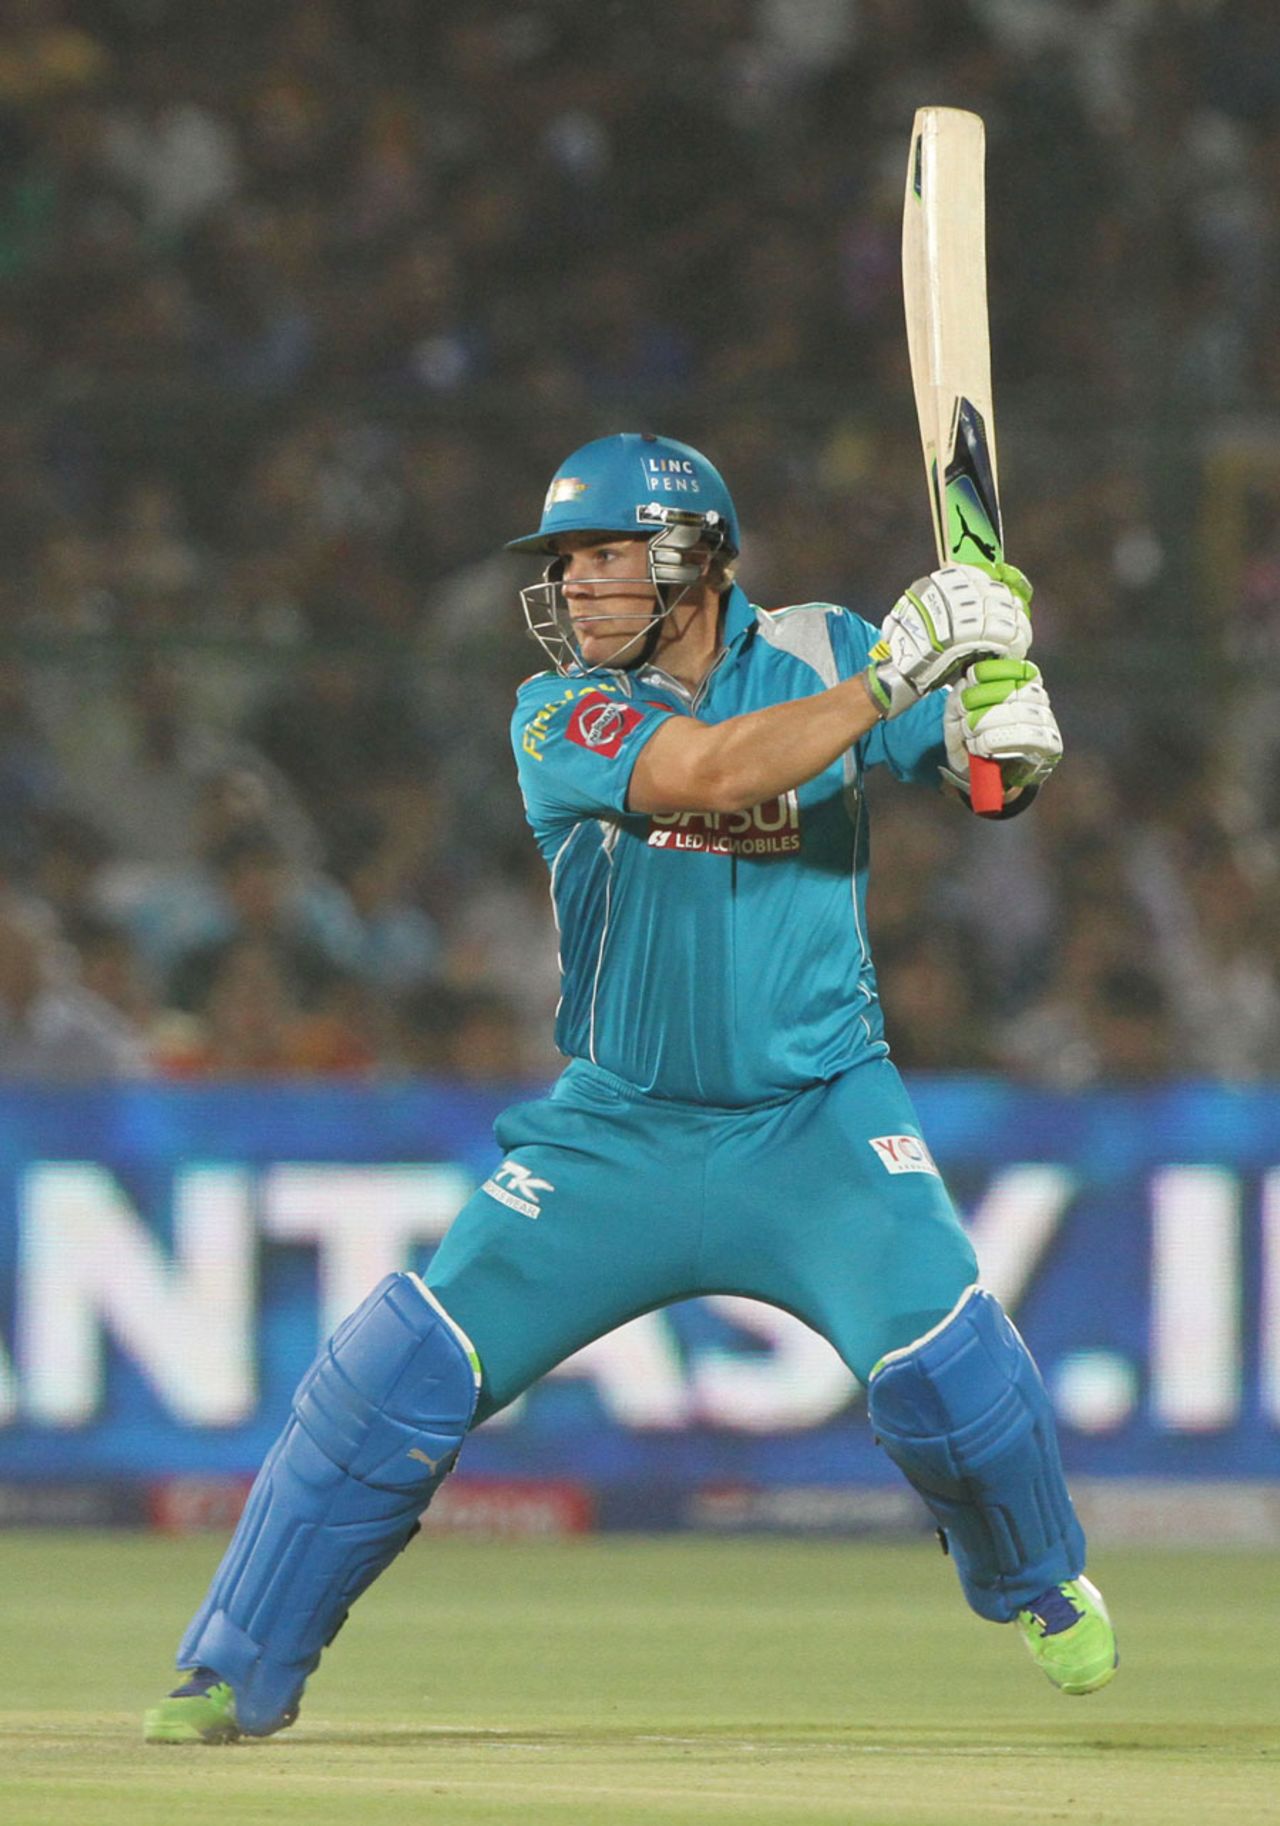 Aaron Finch cuts through the offside, Rajasthan Royals v Pune Warriors, IPL 2013, Jaipur, May 5, 2013